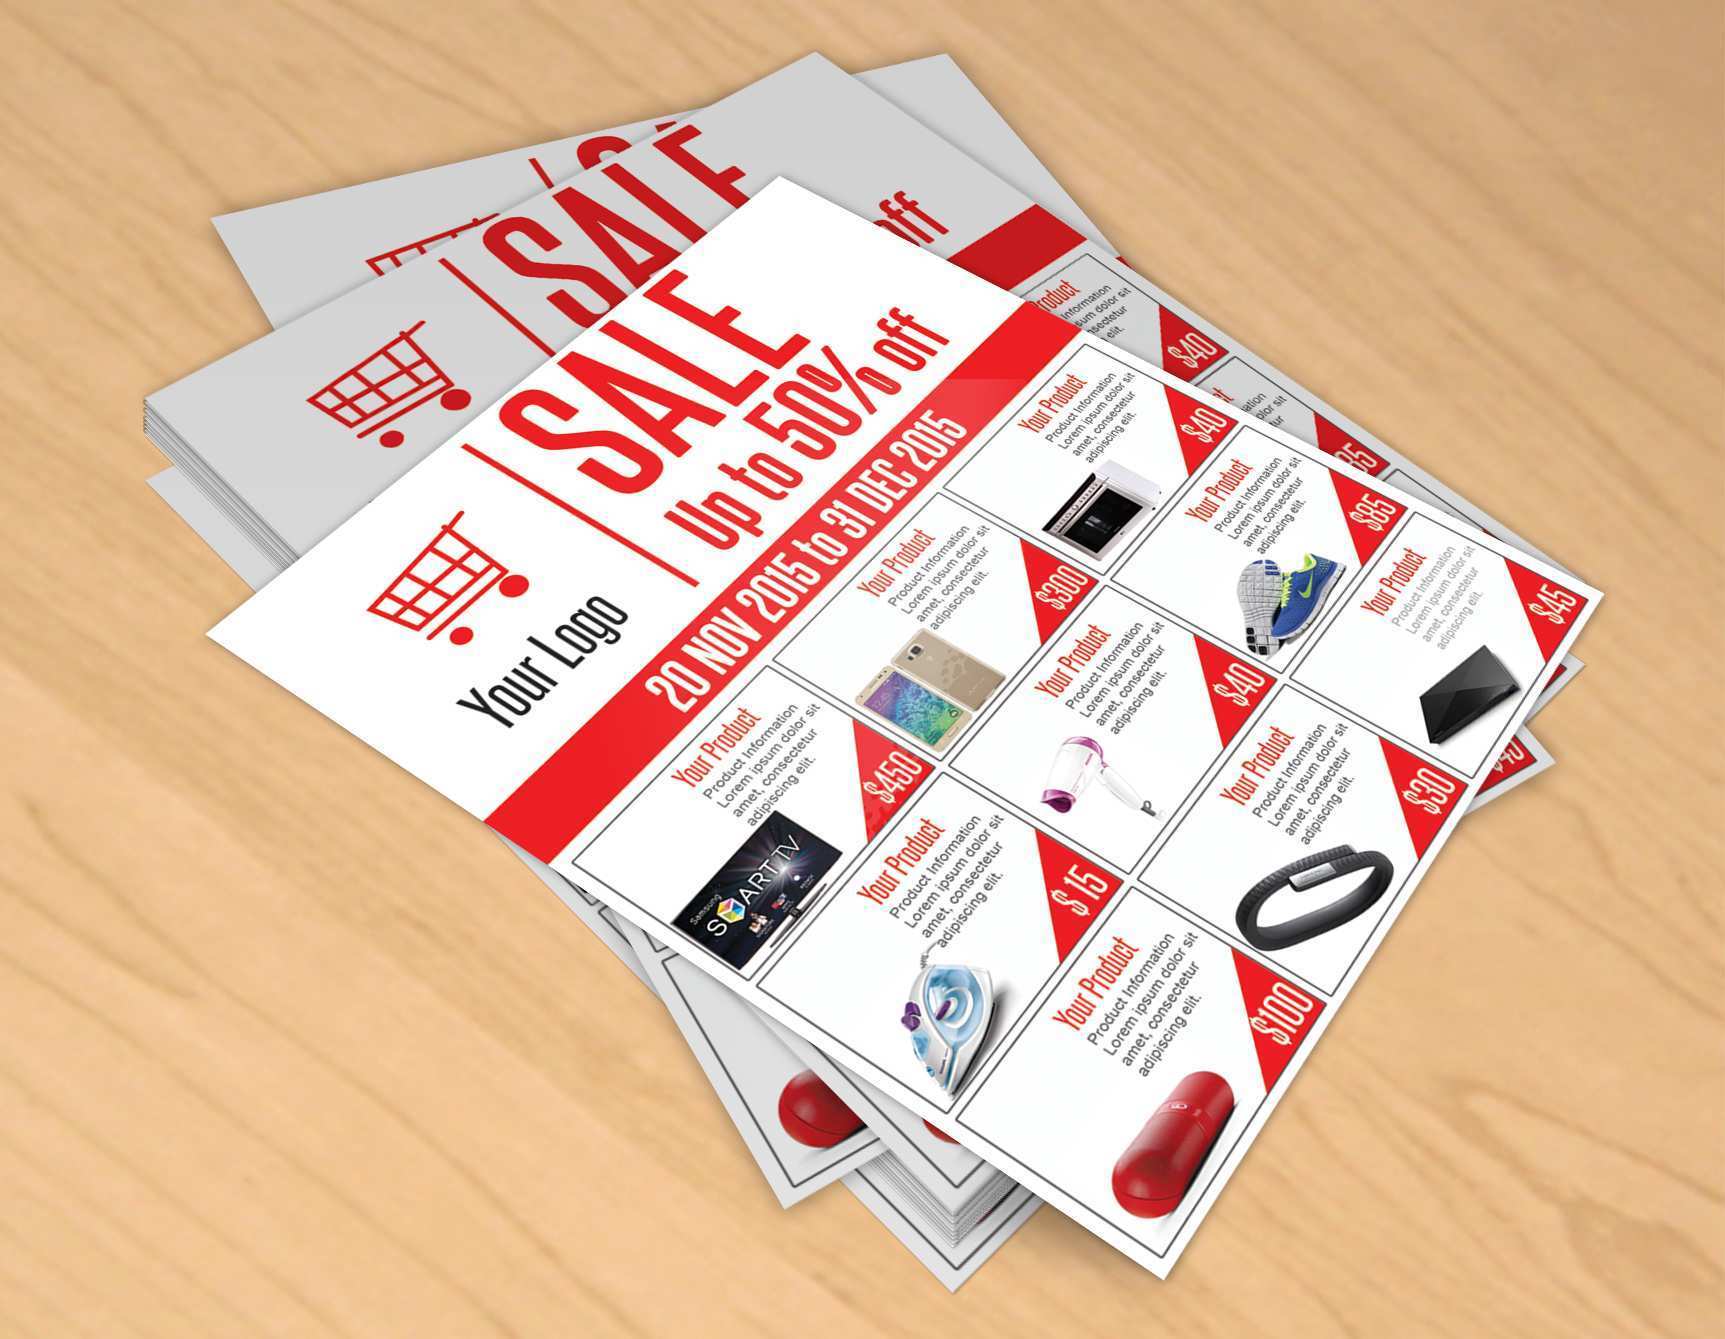 32 Adding Free Templates For Brochures And Flyers Layouts for Free Templates For Brochures And Flyers